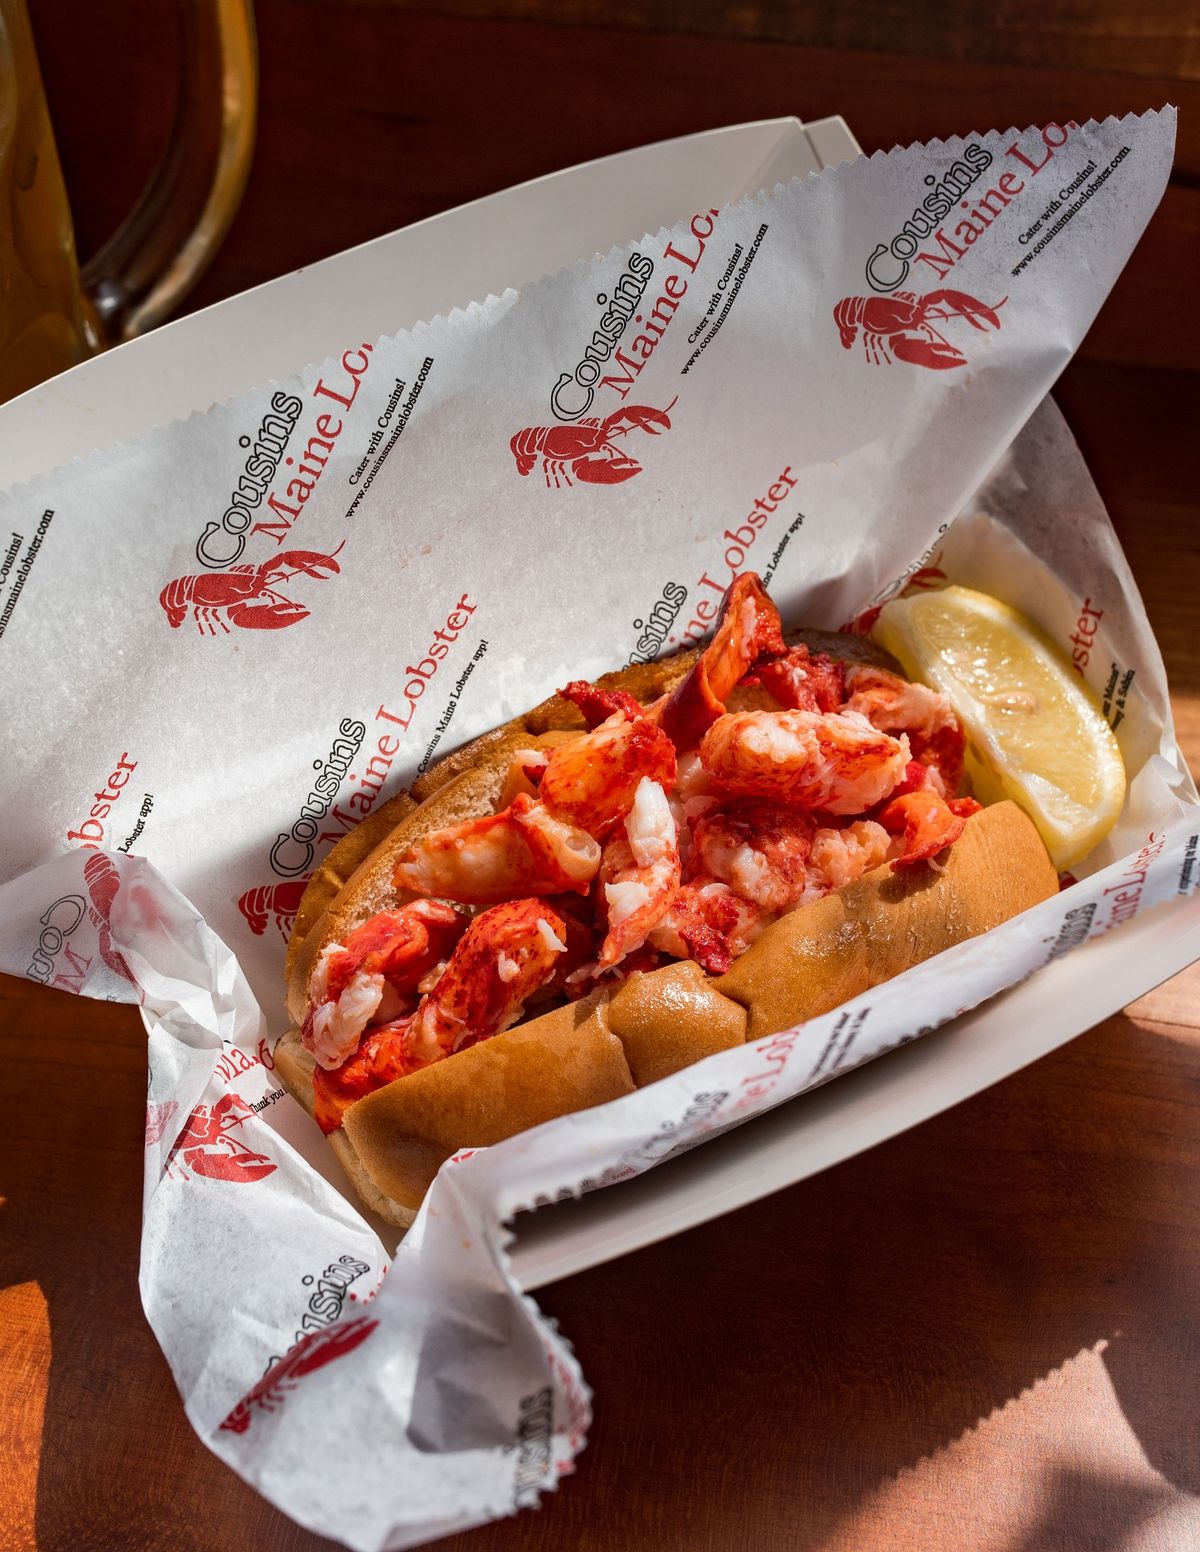 Cousins Maine Lobster in Rancho Cucamonga: Hamilton Family Brewery\ud83c\udf7a\ud83e\udd9e